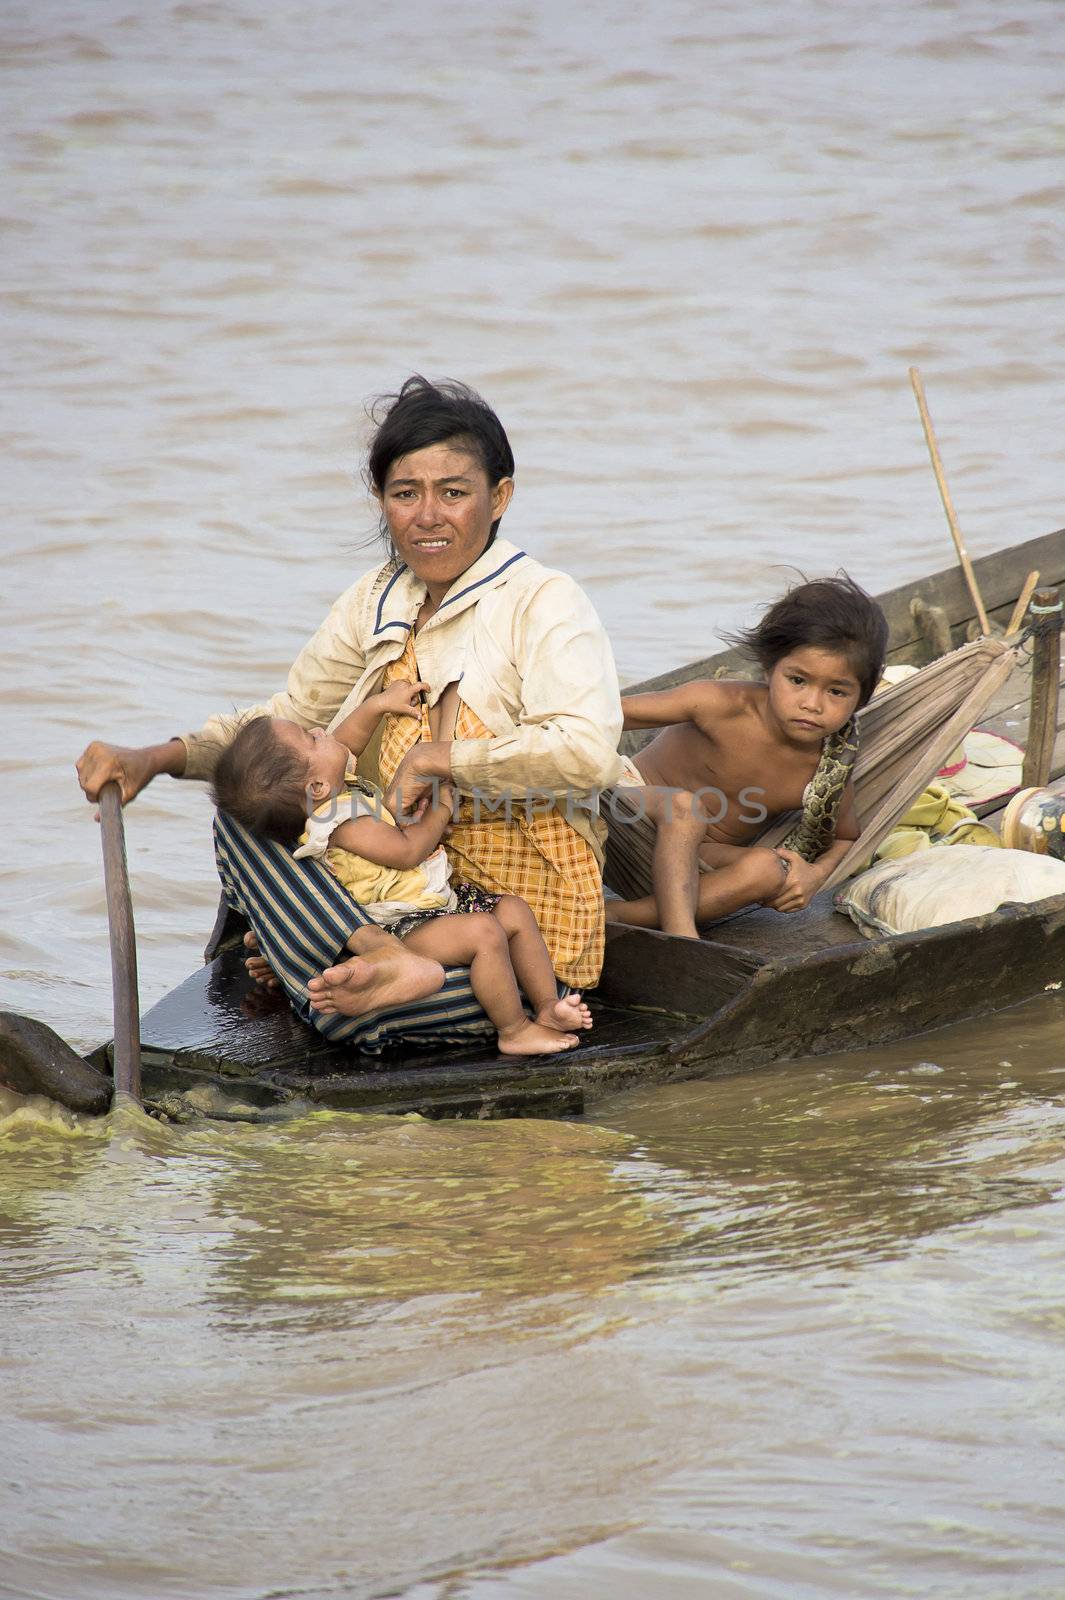 CAMBODIA – May 2012: Cambodian family in a rough wooden boat sailing in Tonle Sap Lake in Cambodia in May 2012.  Living conditions in the area are difficult - Cambodia
